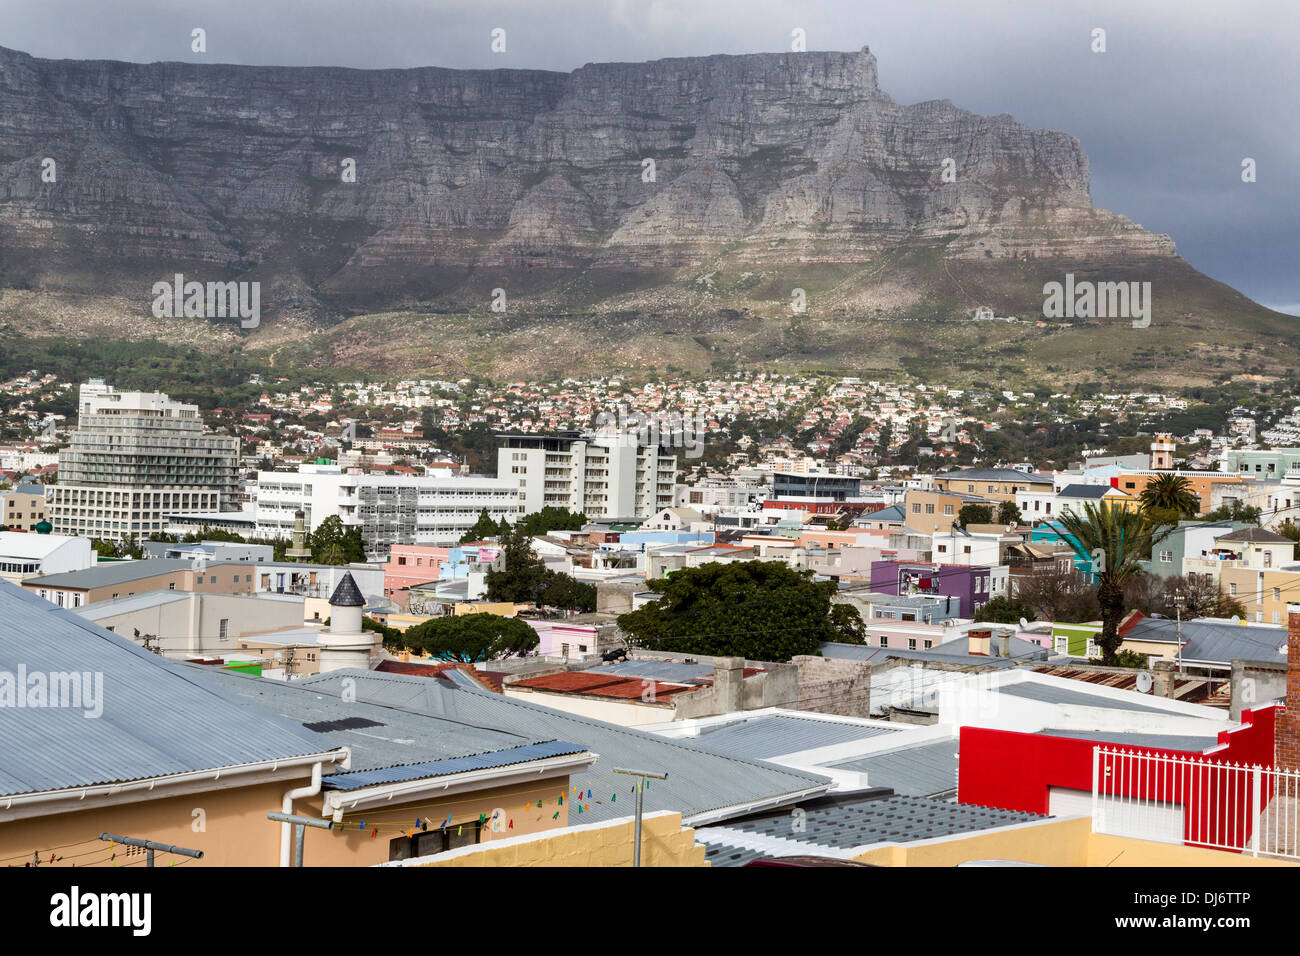 South Africa, Cape Town. View of Cape Town and Table Mountain from the upper region of Bo-kaap. Stock Photo